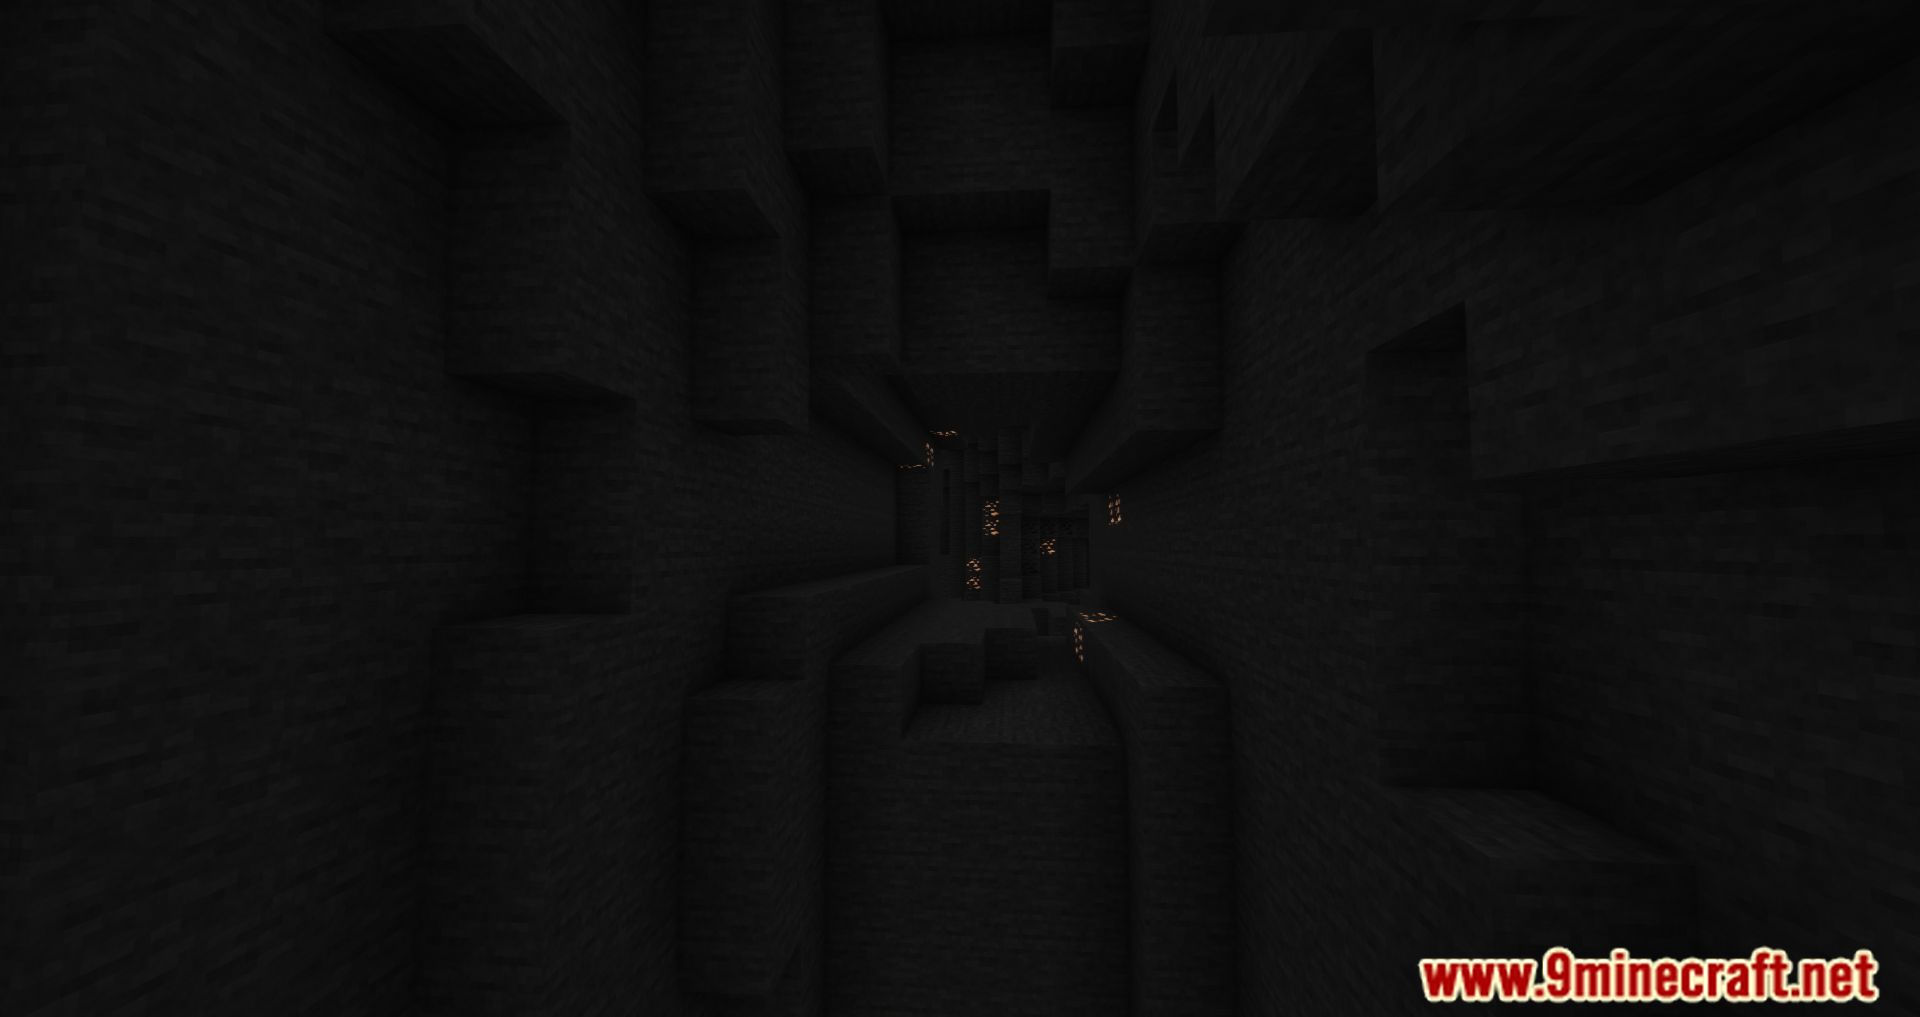 Cave Generator Mod (1.16.5, 1.12.2) - Fully Customize Mojang's Tunnels 9